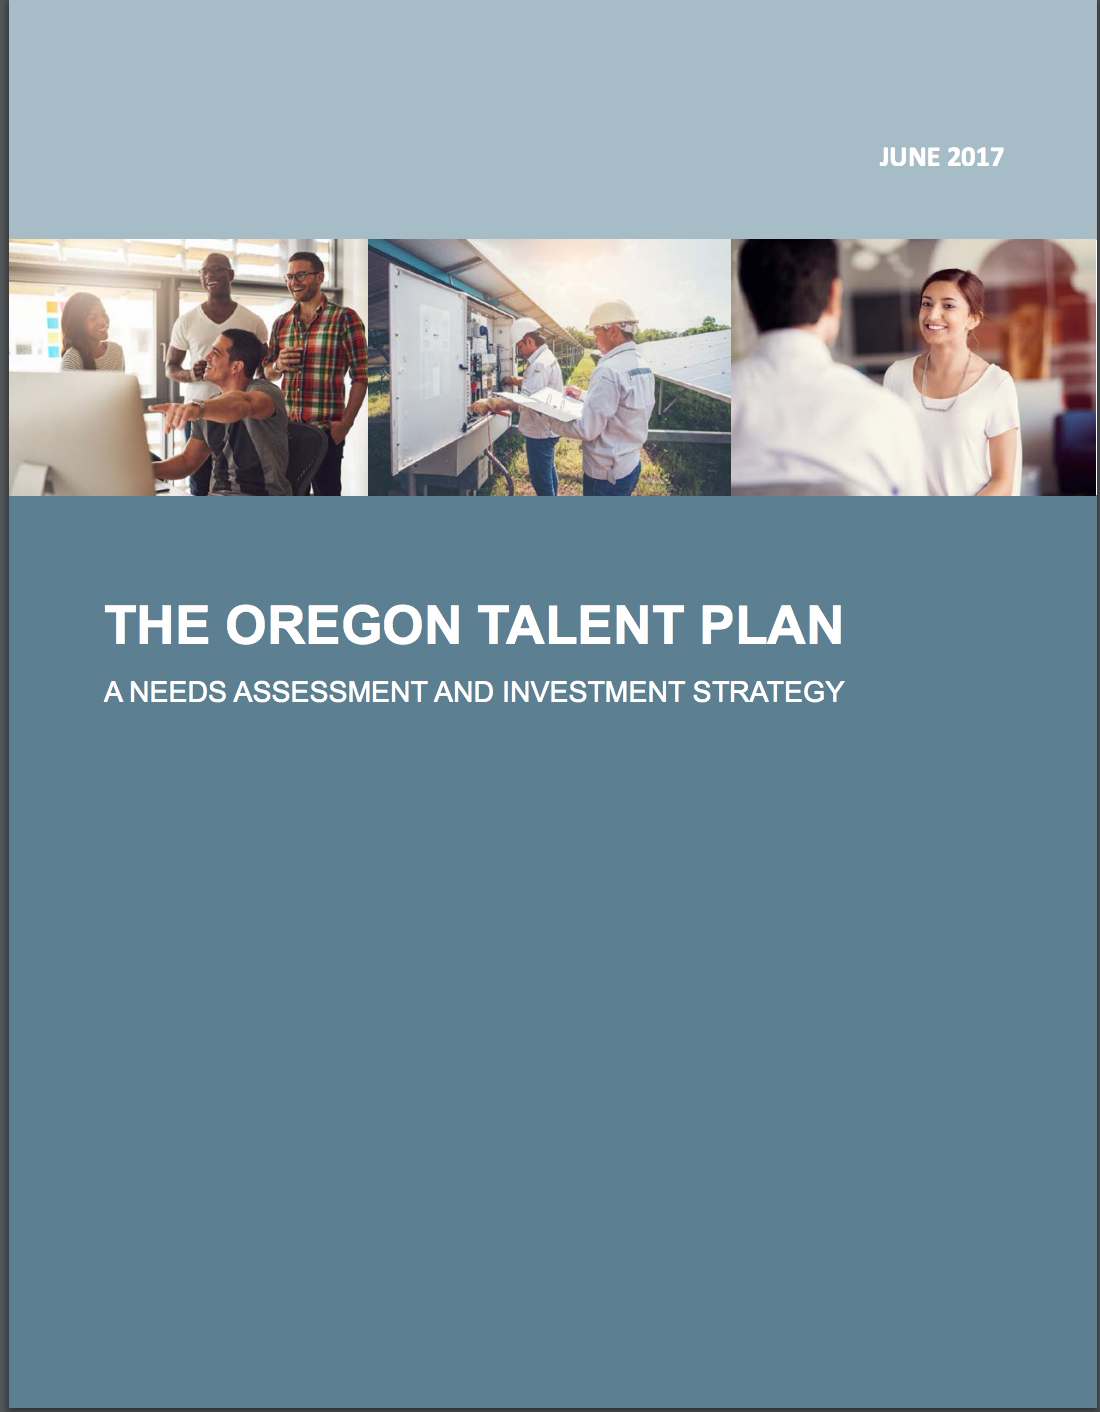 The Number One Challenge for Oregon Employers